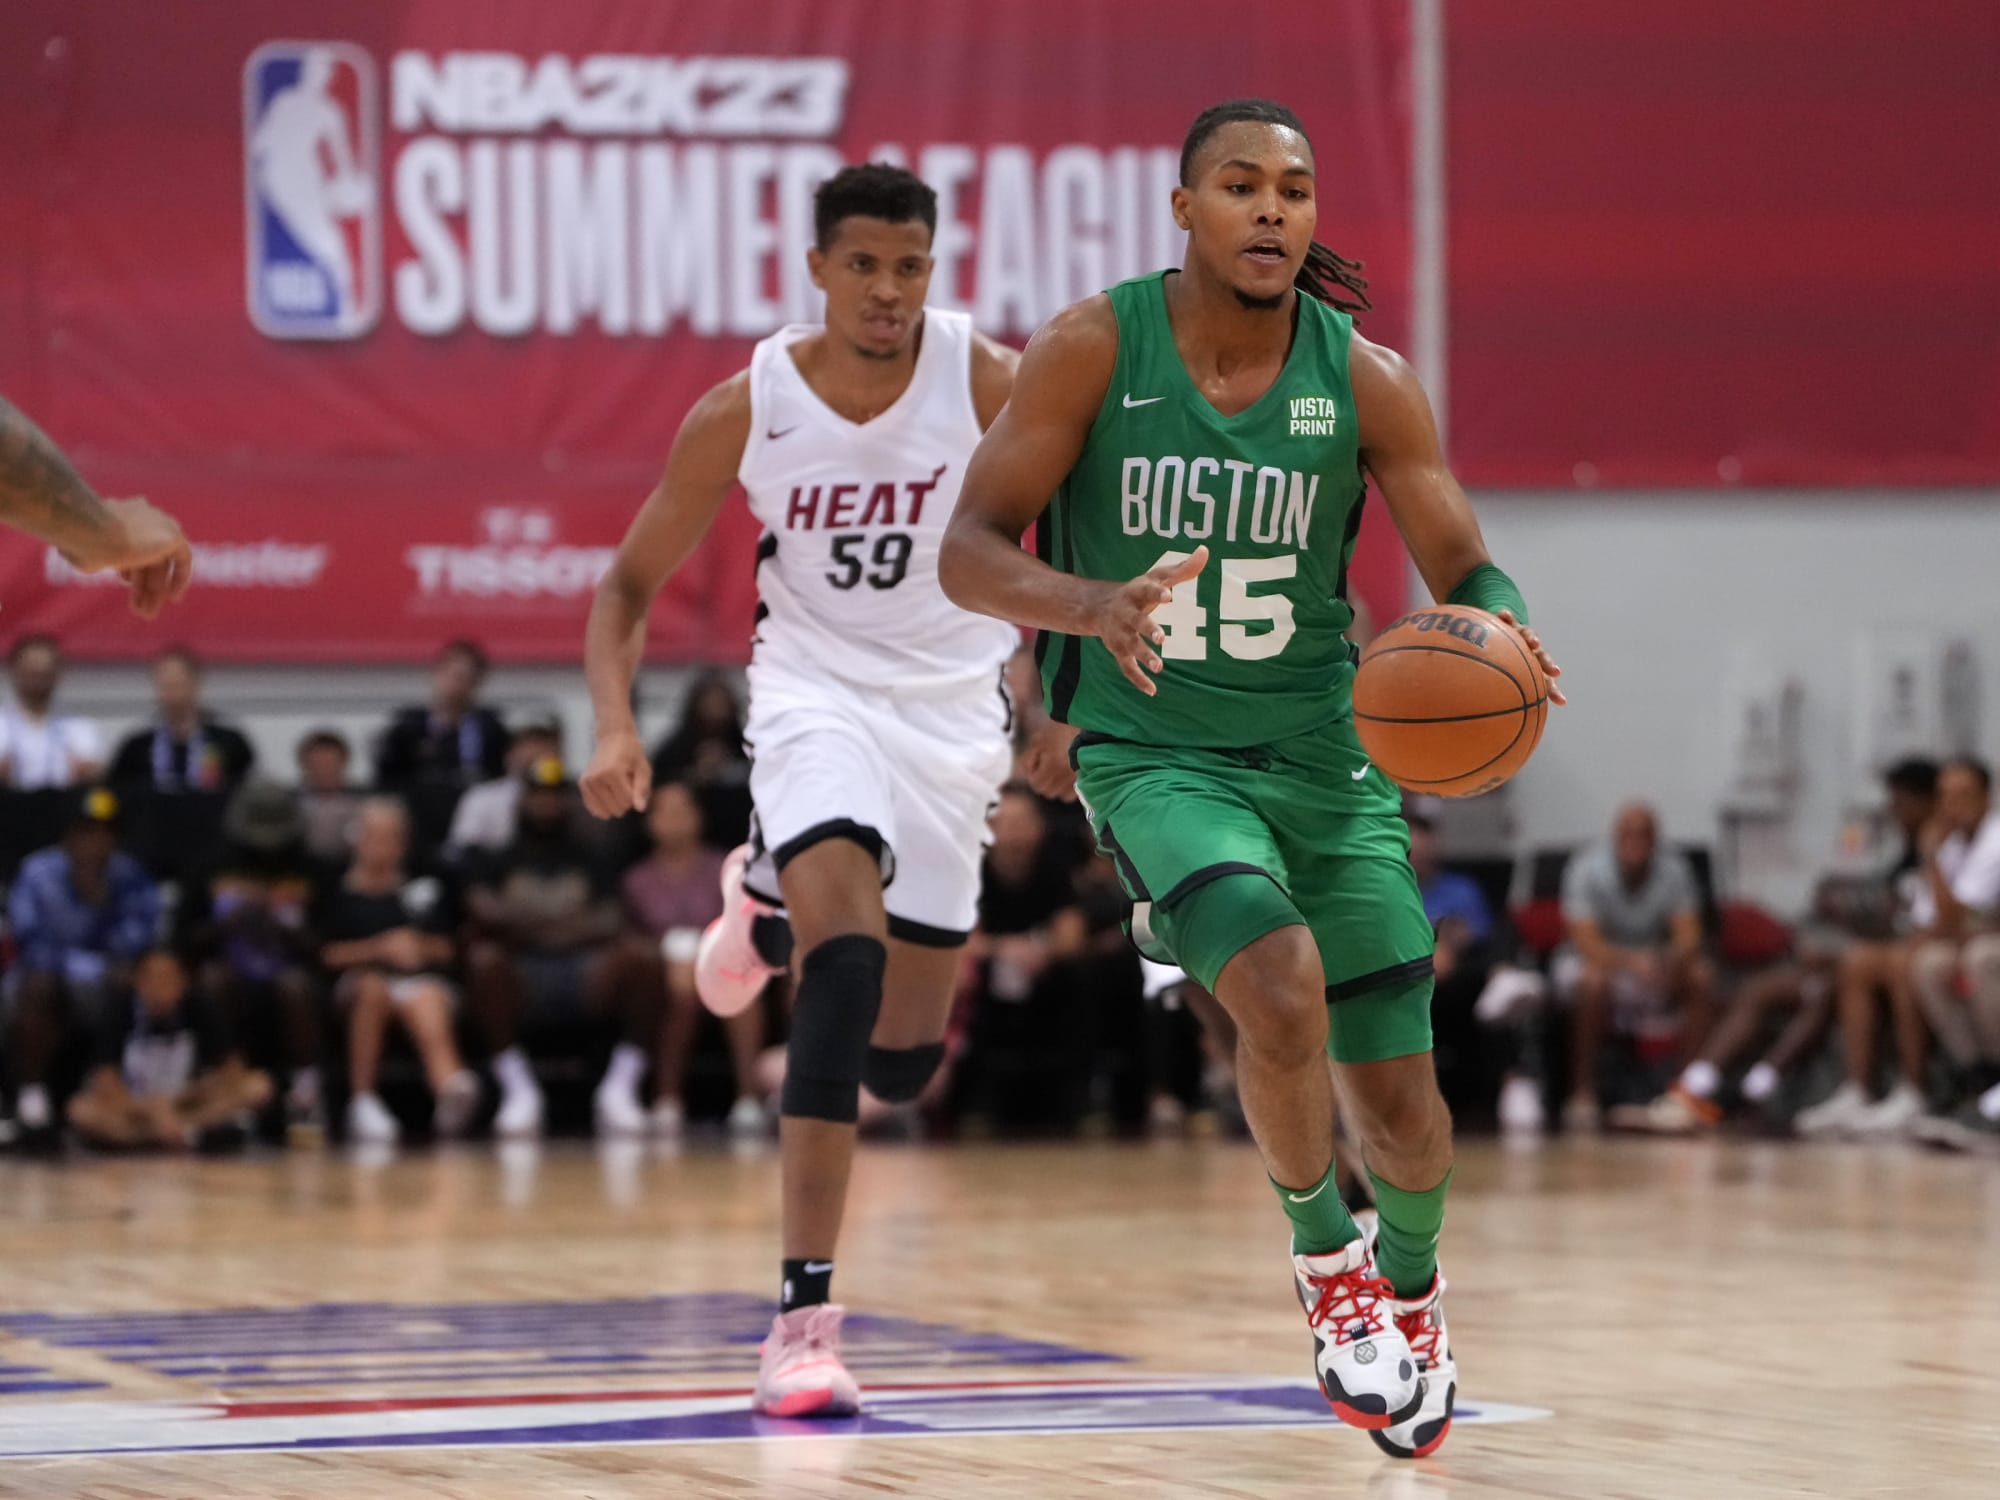 Miami Heat A brief look into some of their newest summer signings